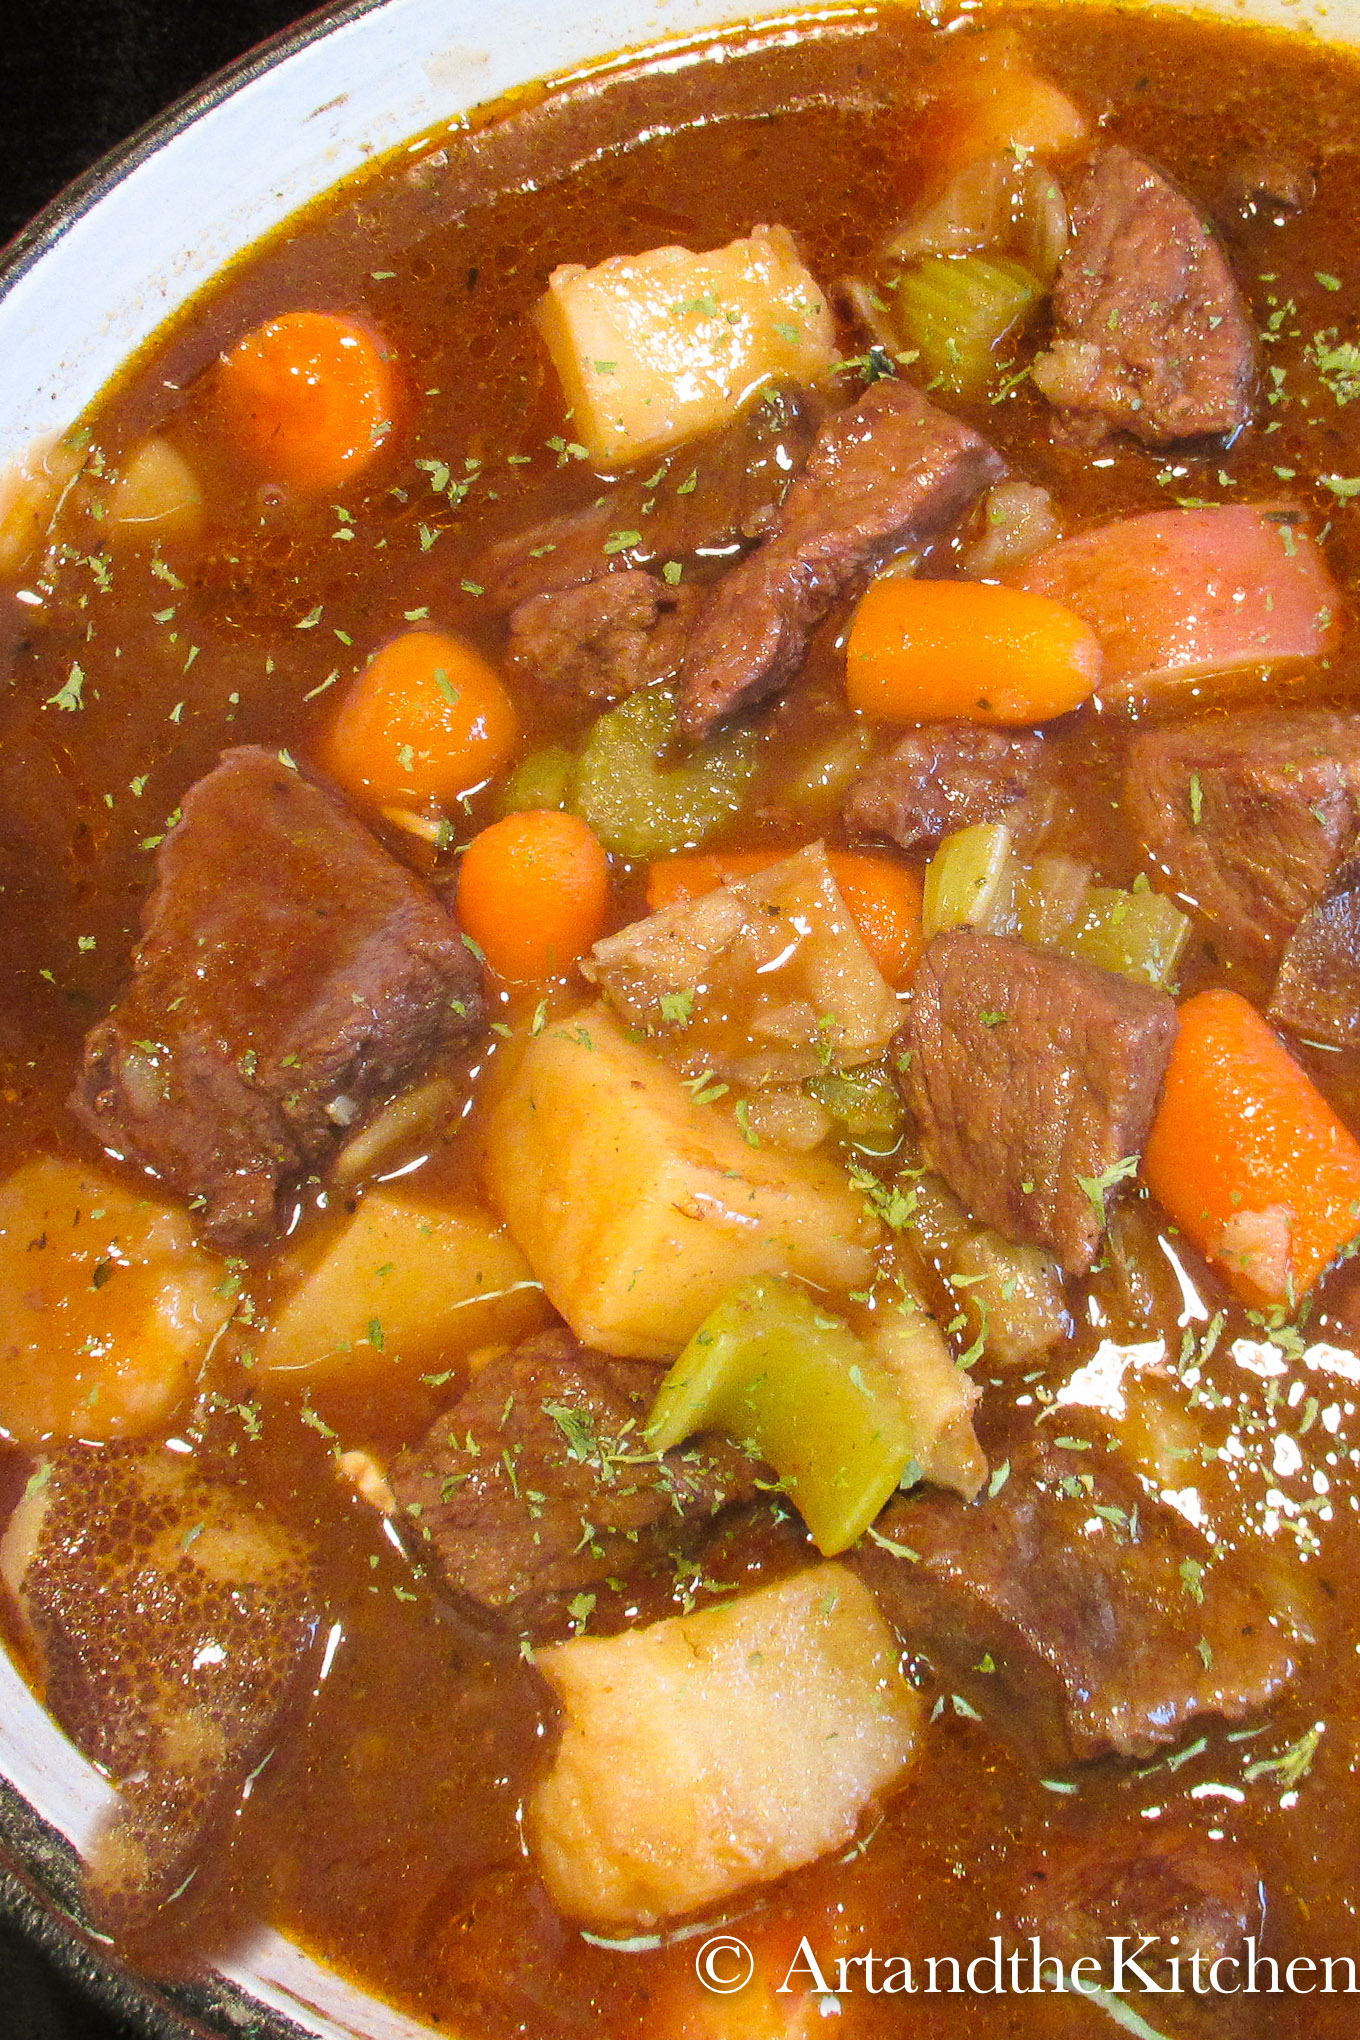 A saucy stew of beef and vegetables in a cast iron pot